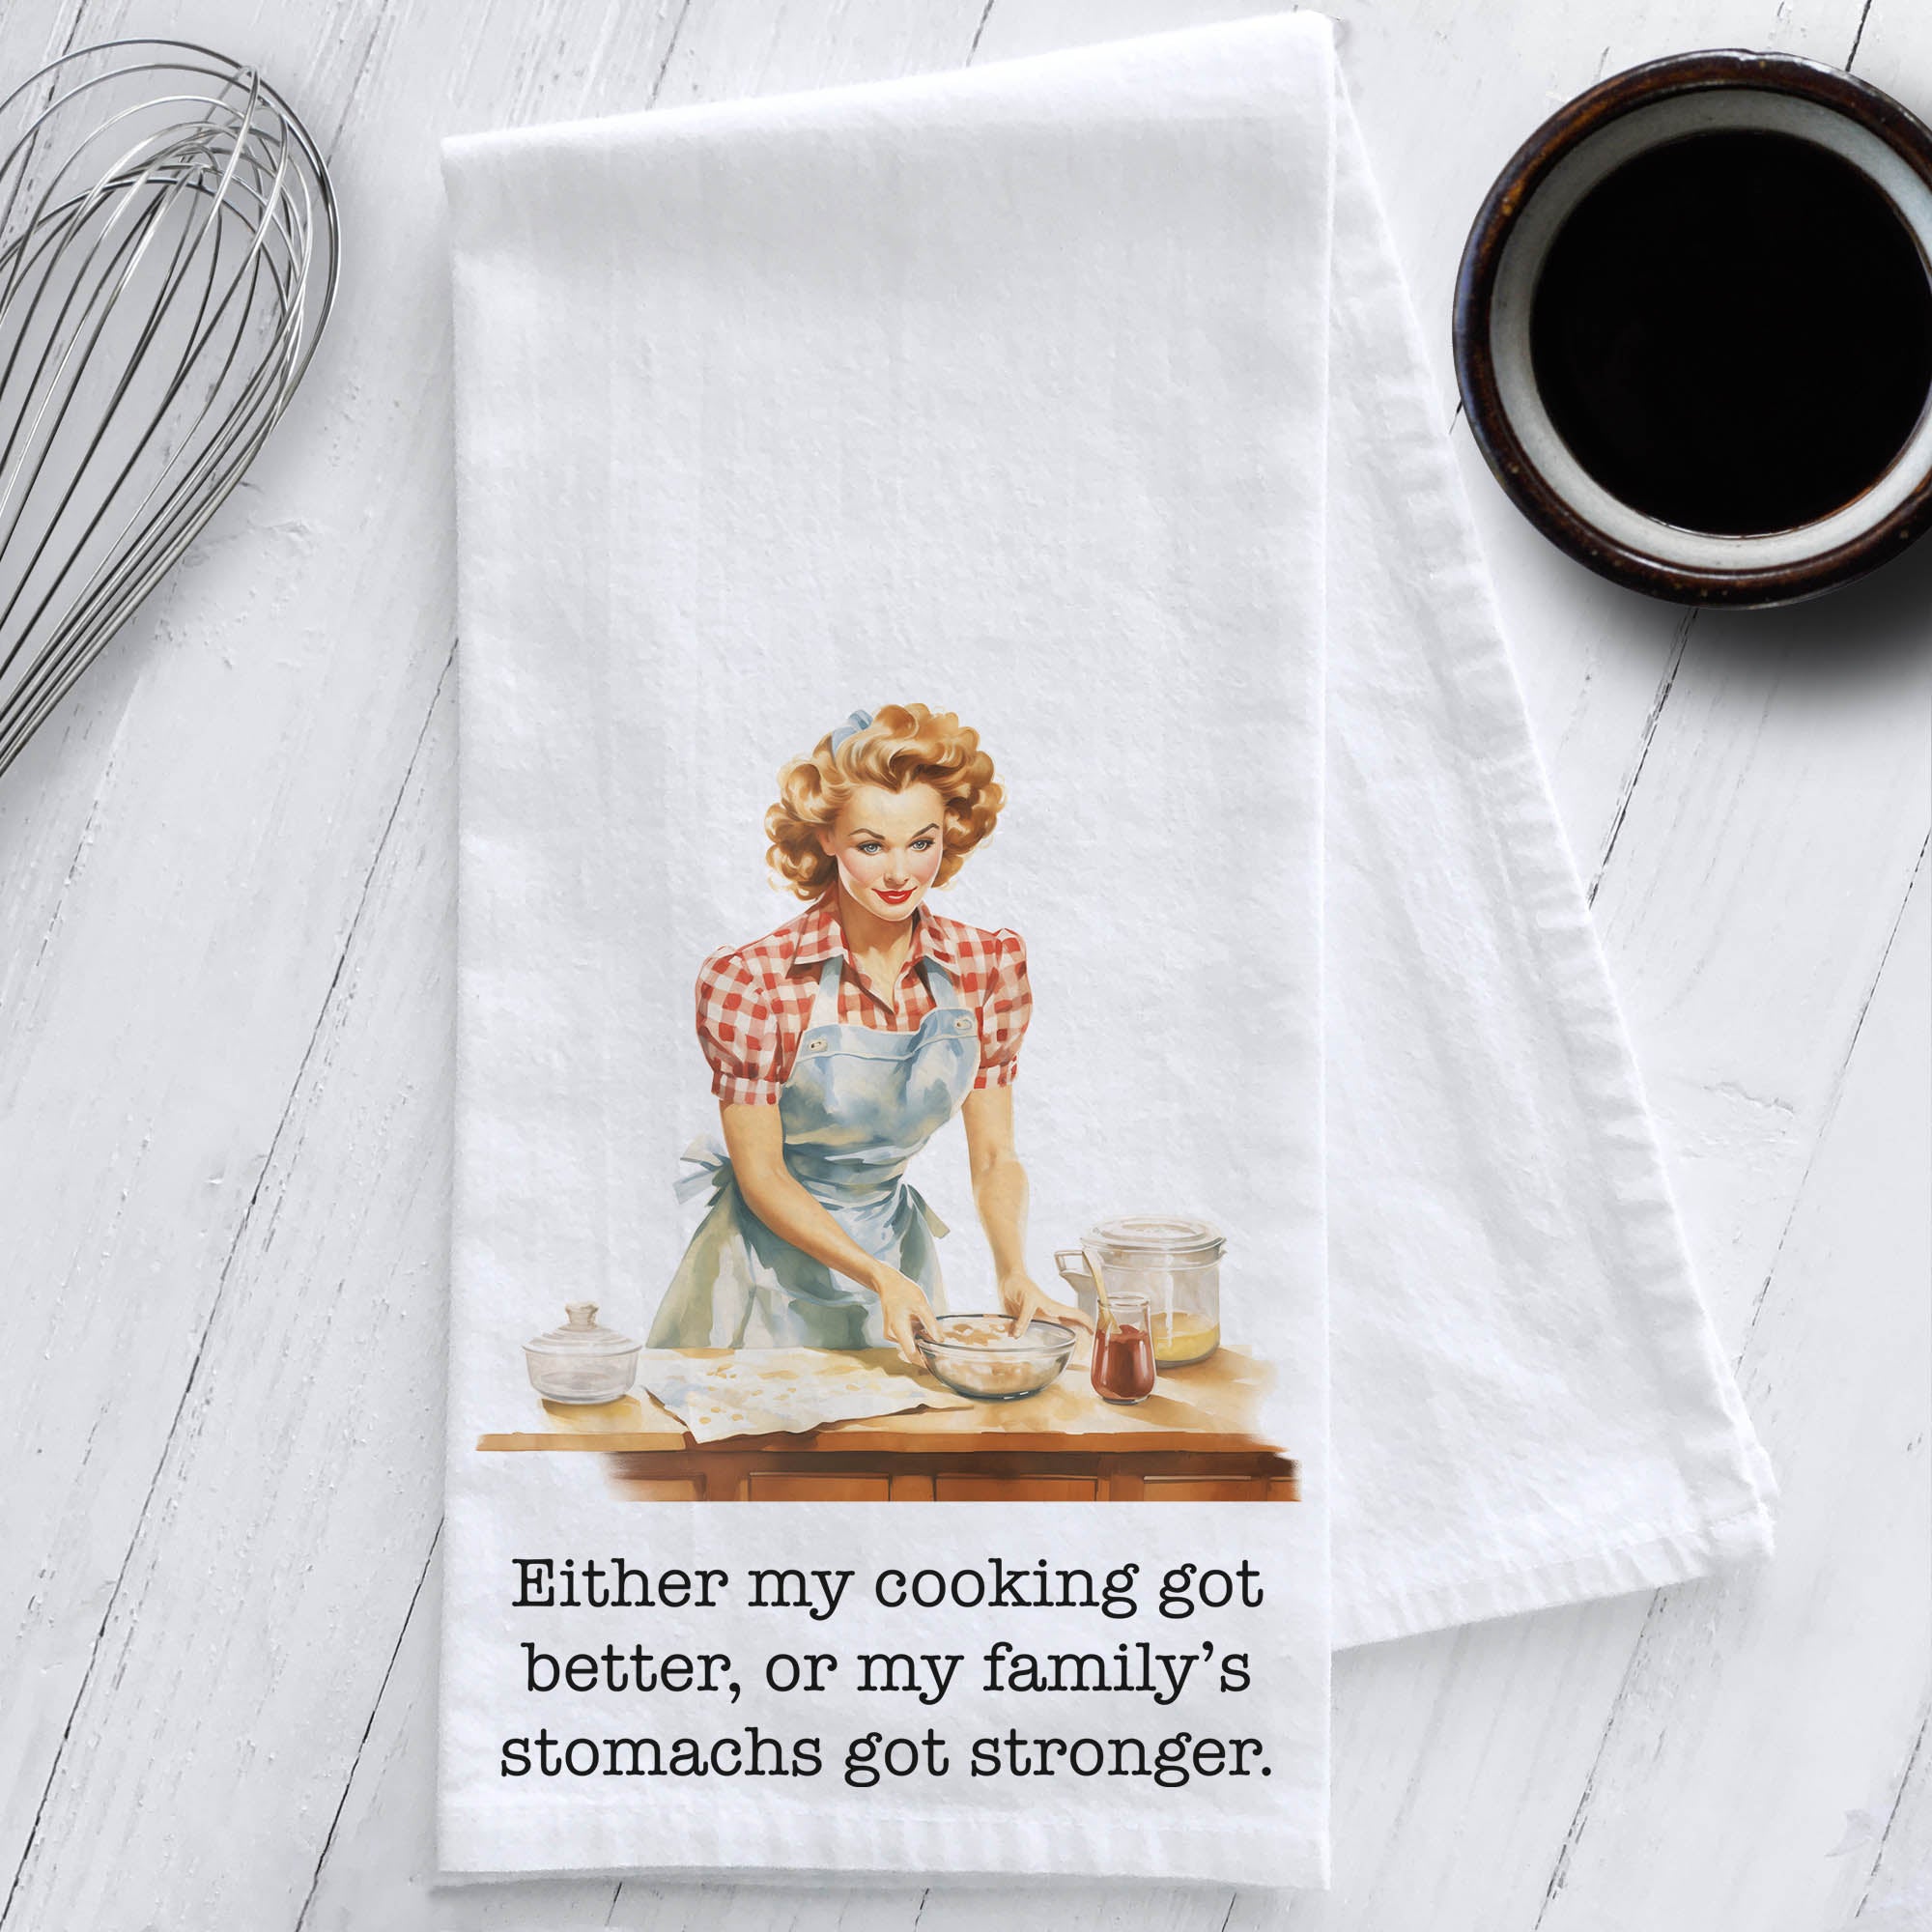 Either my cooking got better, or my family’s stomachs got stronger Sassy Retro Tea Towel